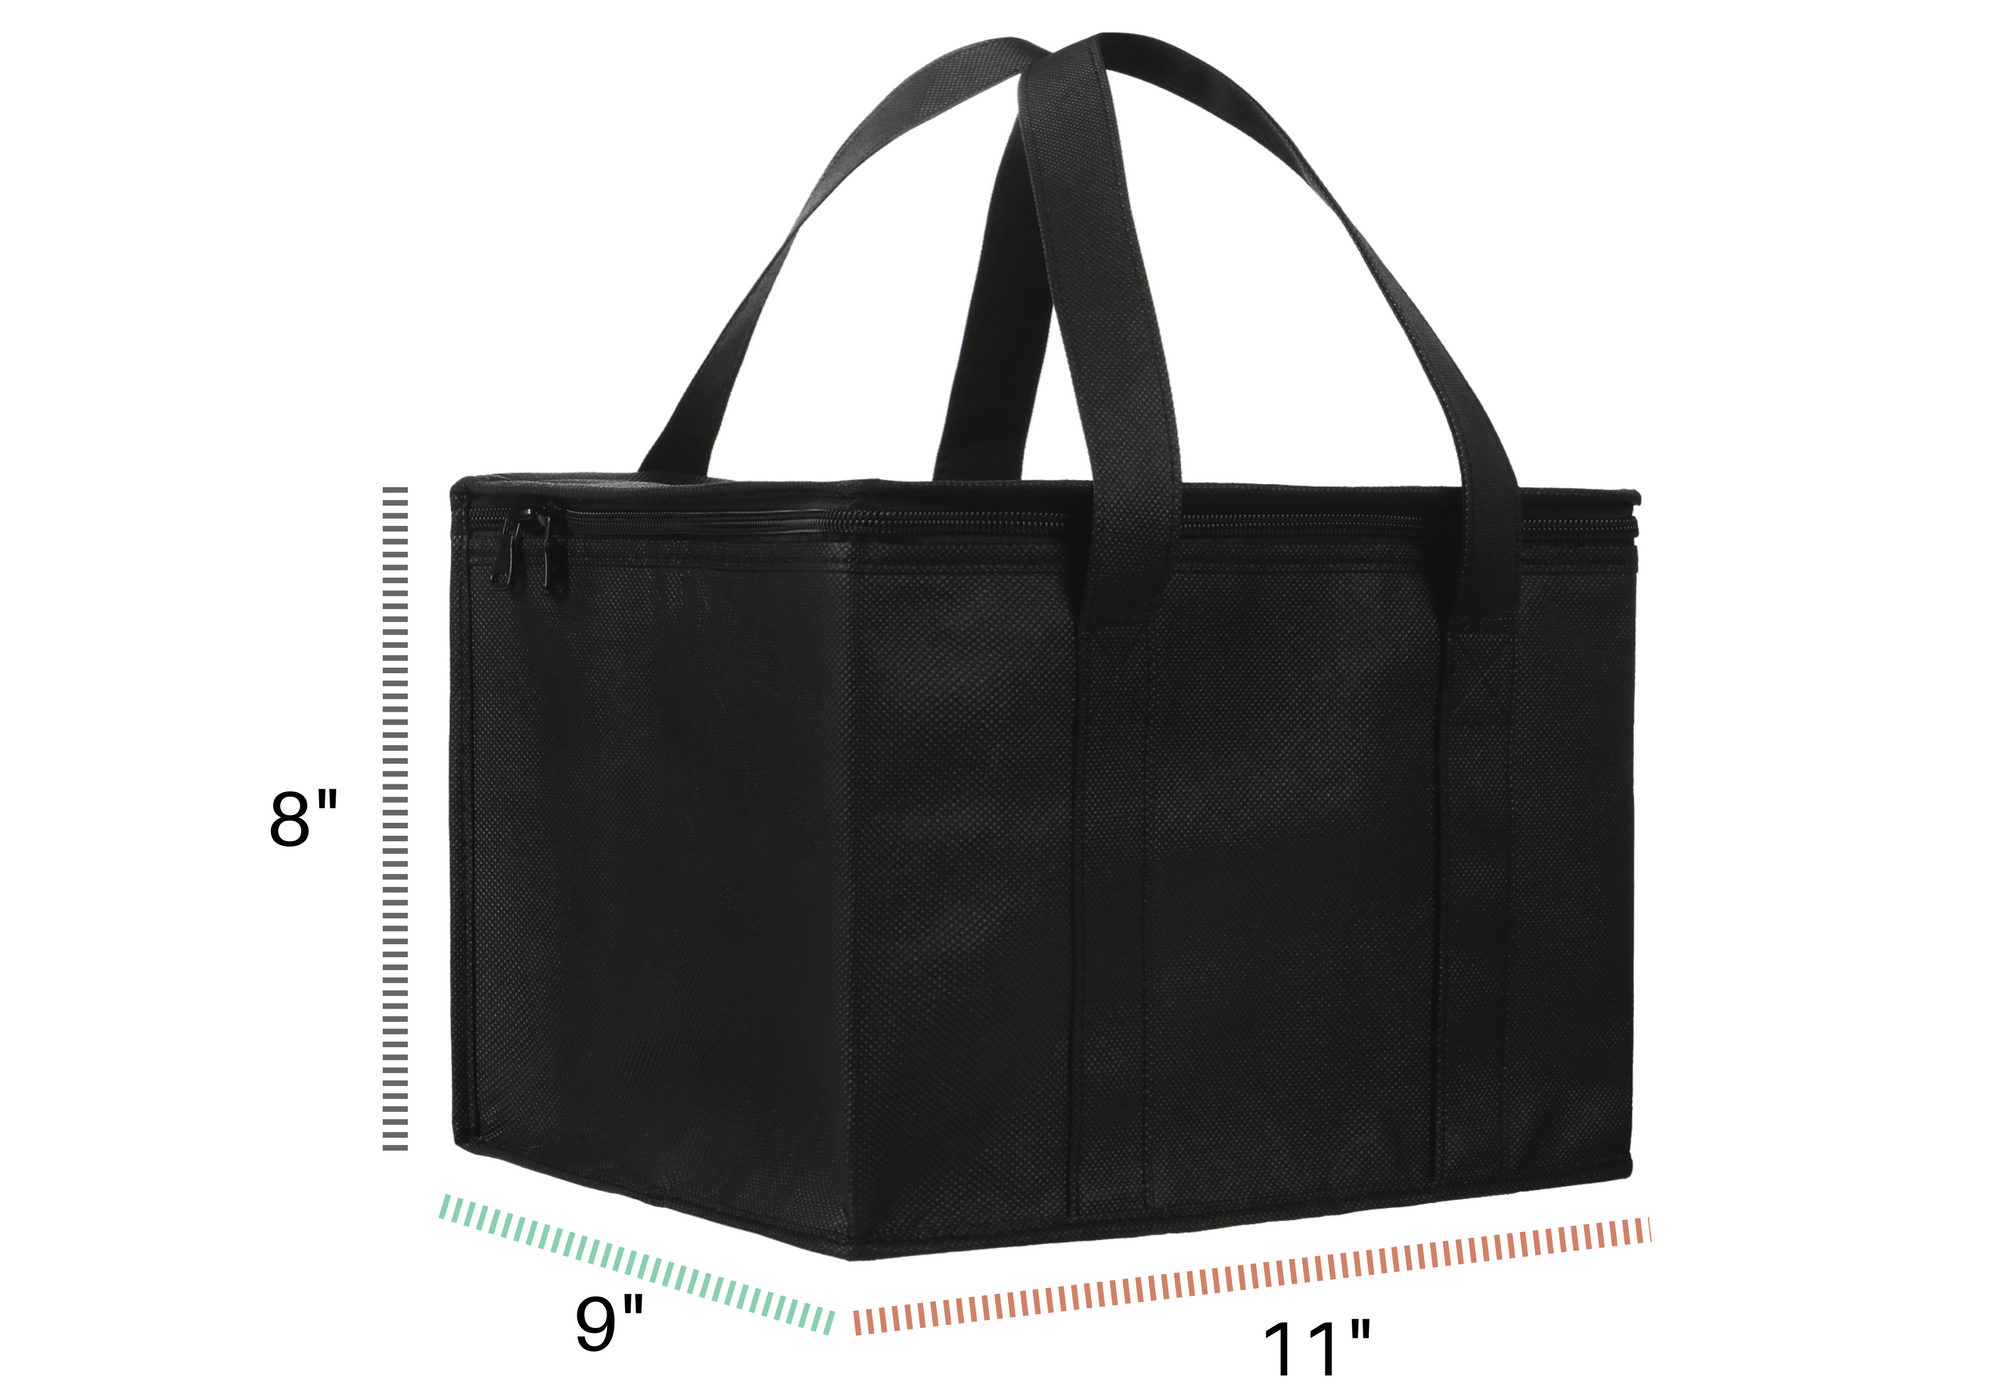 insulated bag dimenstions.png